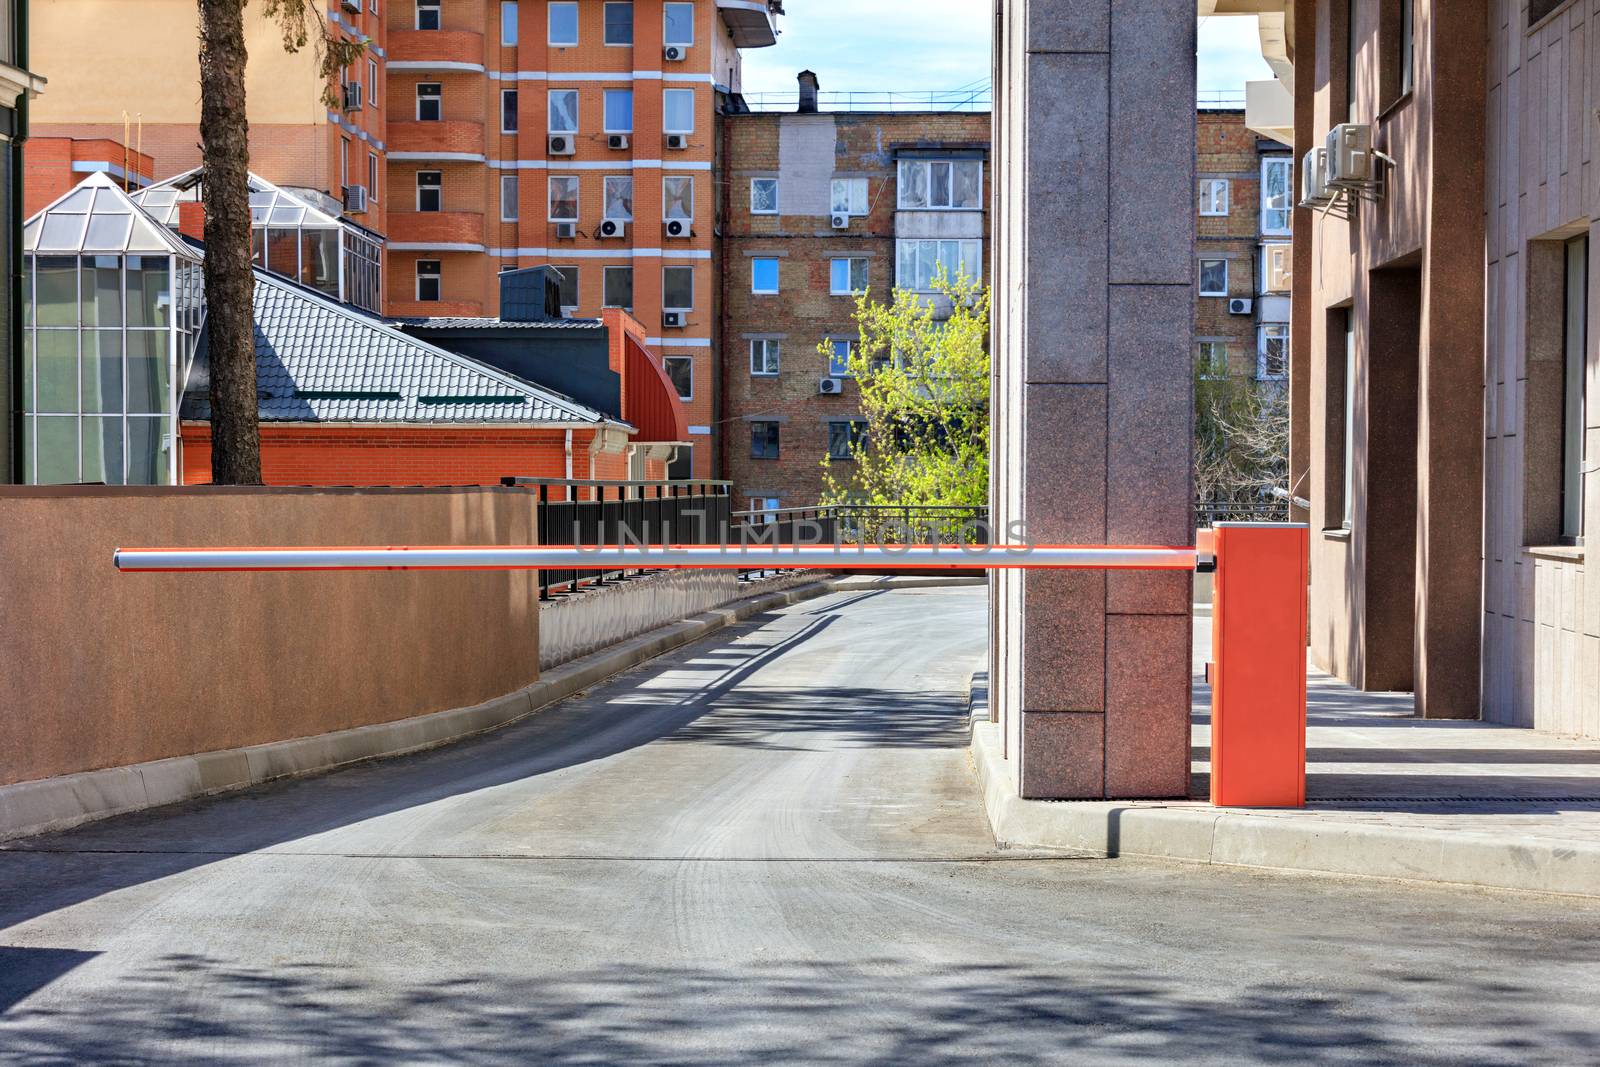 Automatic barrier to enter the courtyard of a residential building. by Sergii